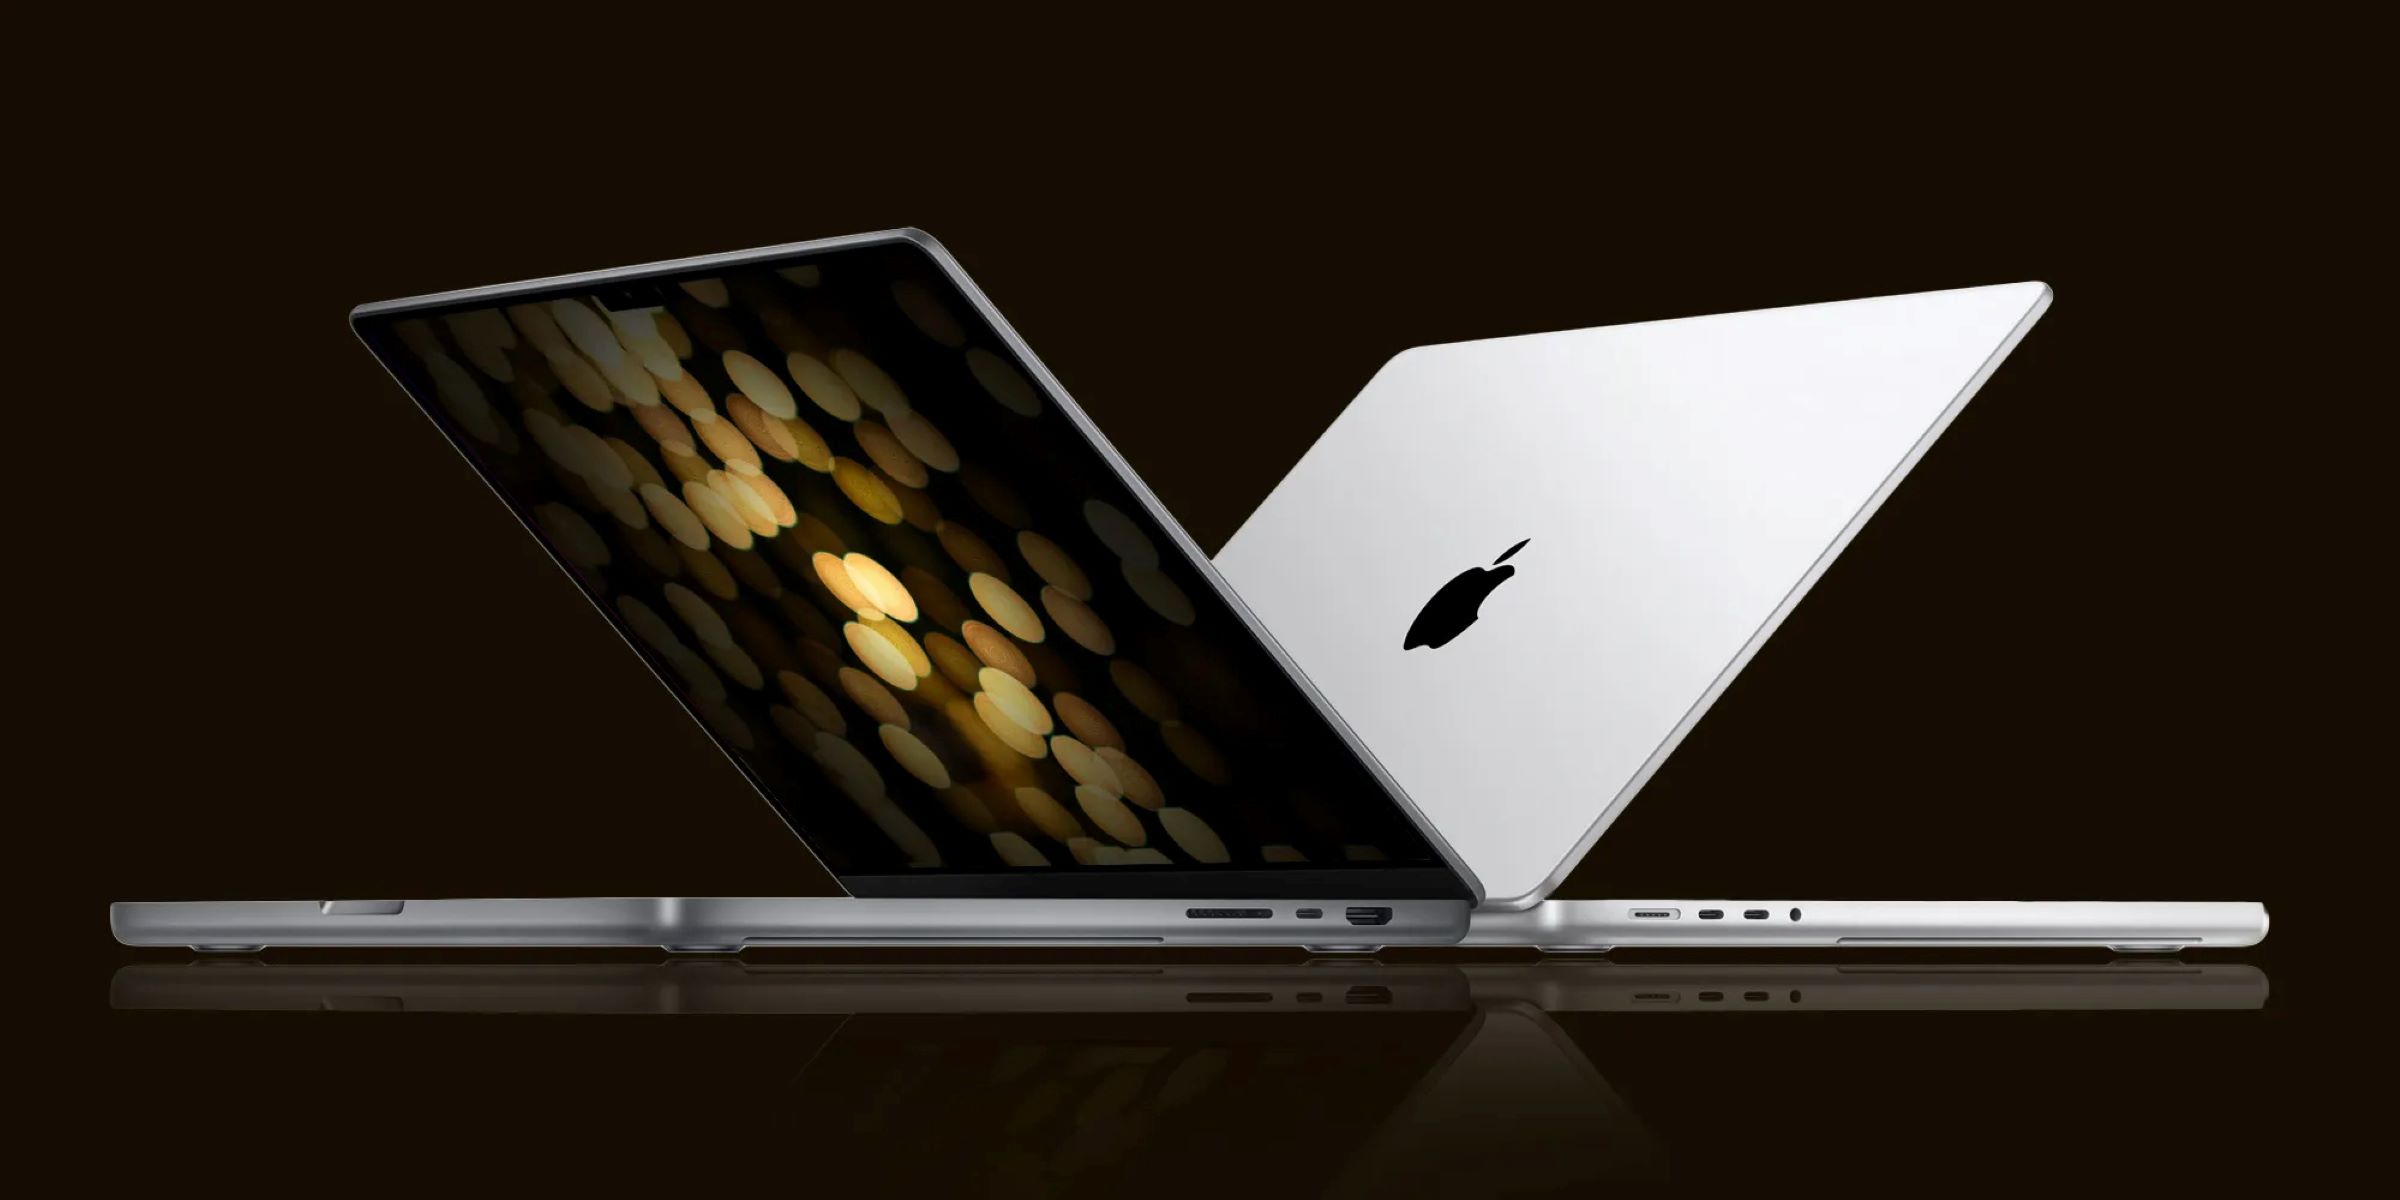 Get A Refurbished MacBook Pro At A Steep Discounted Price